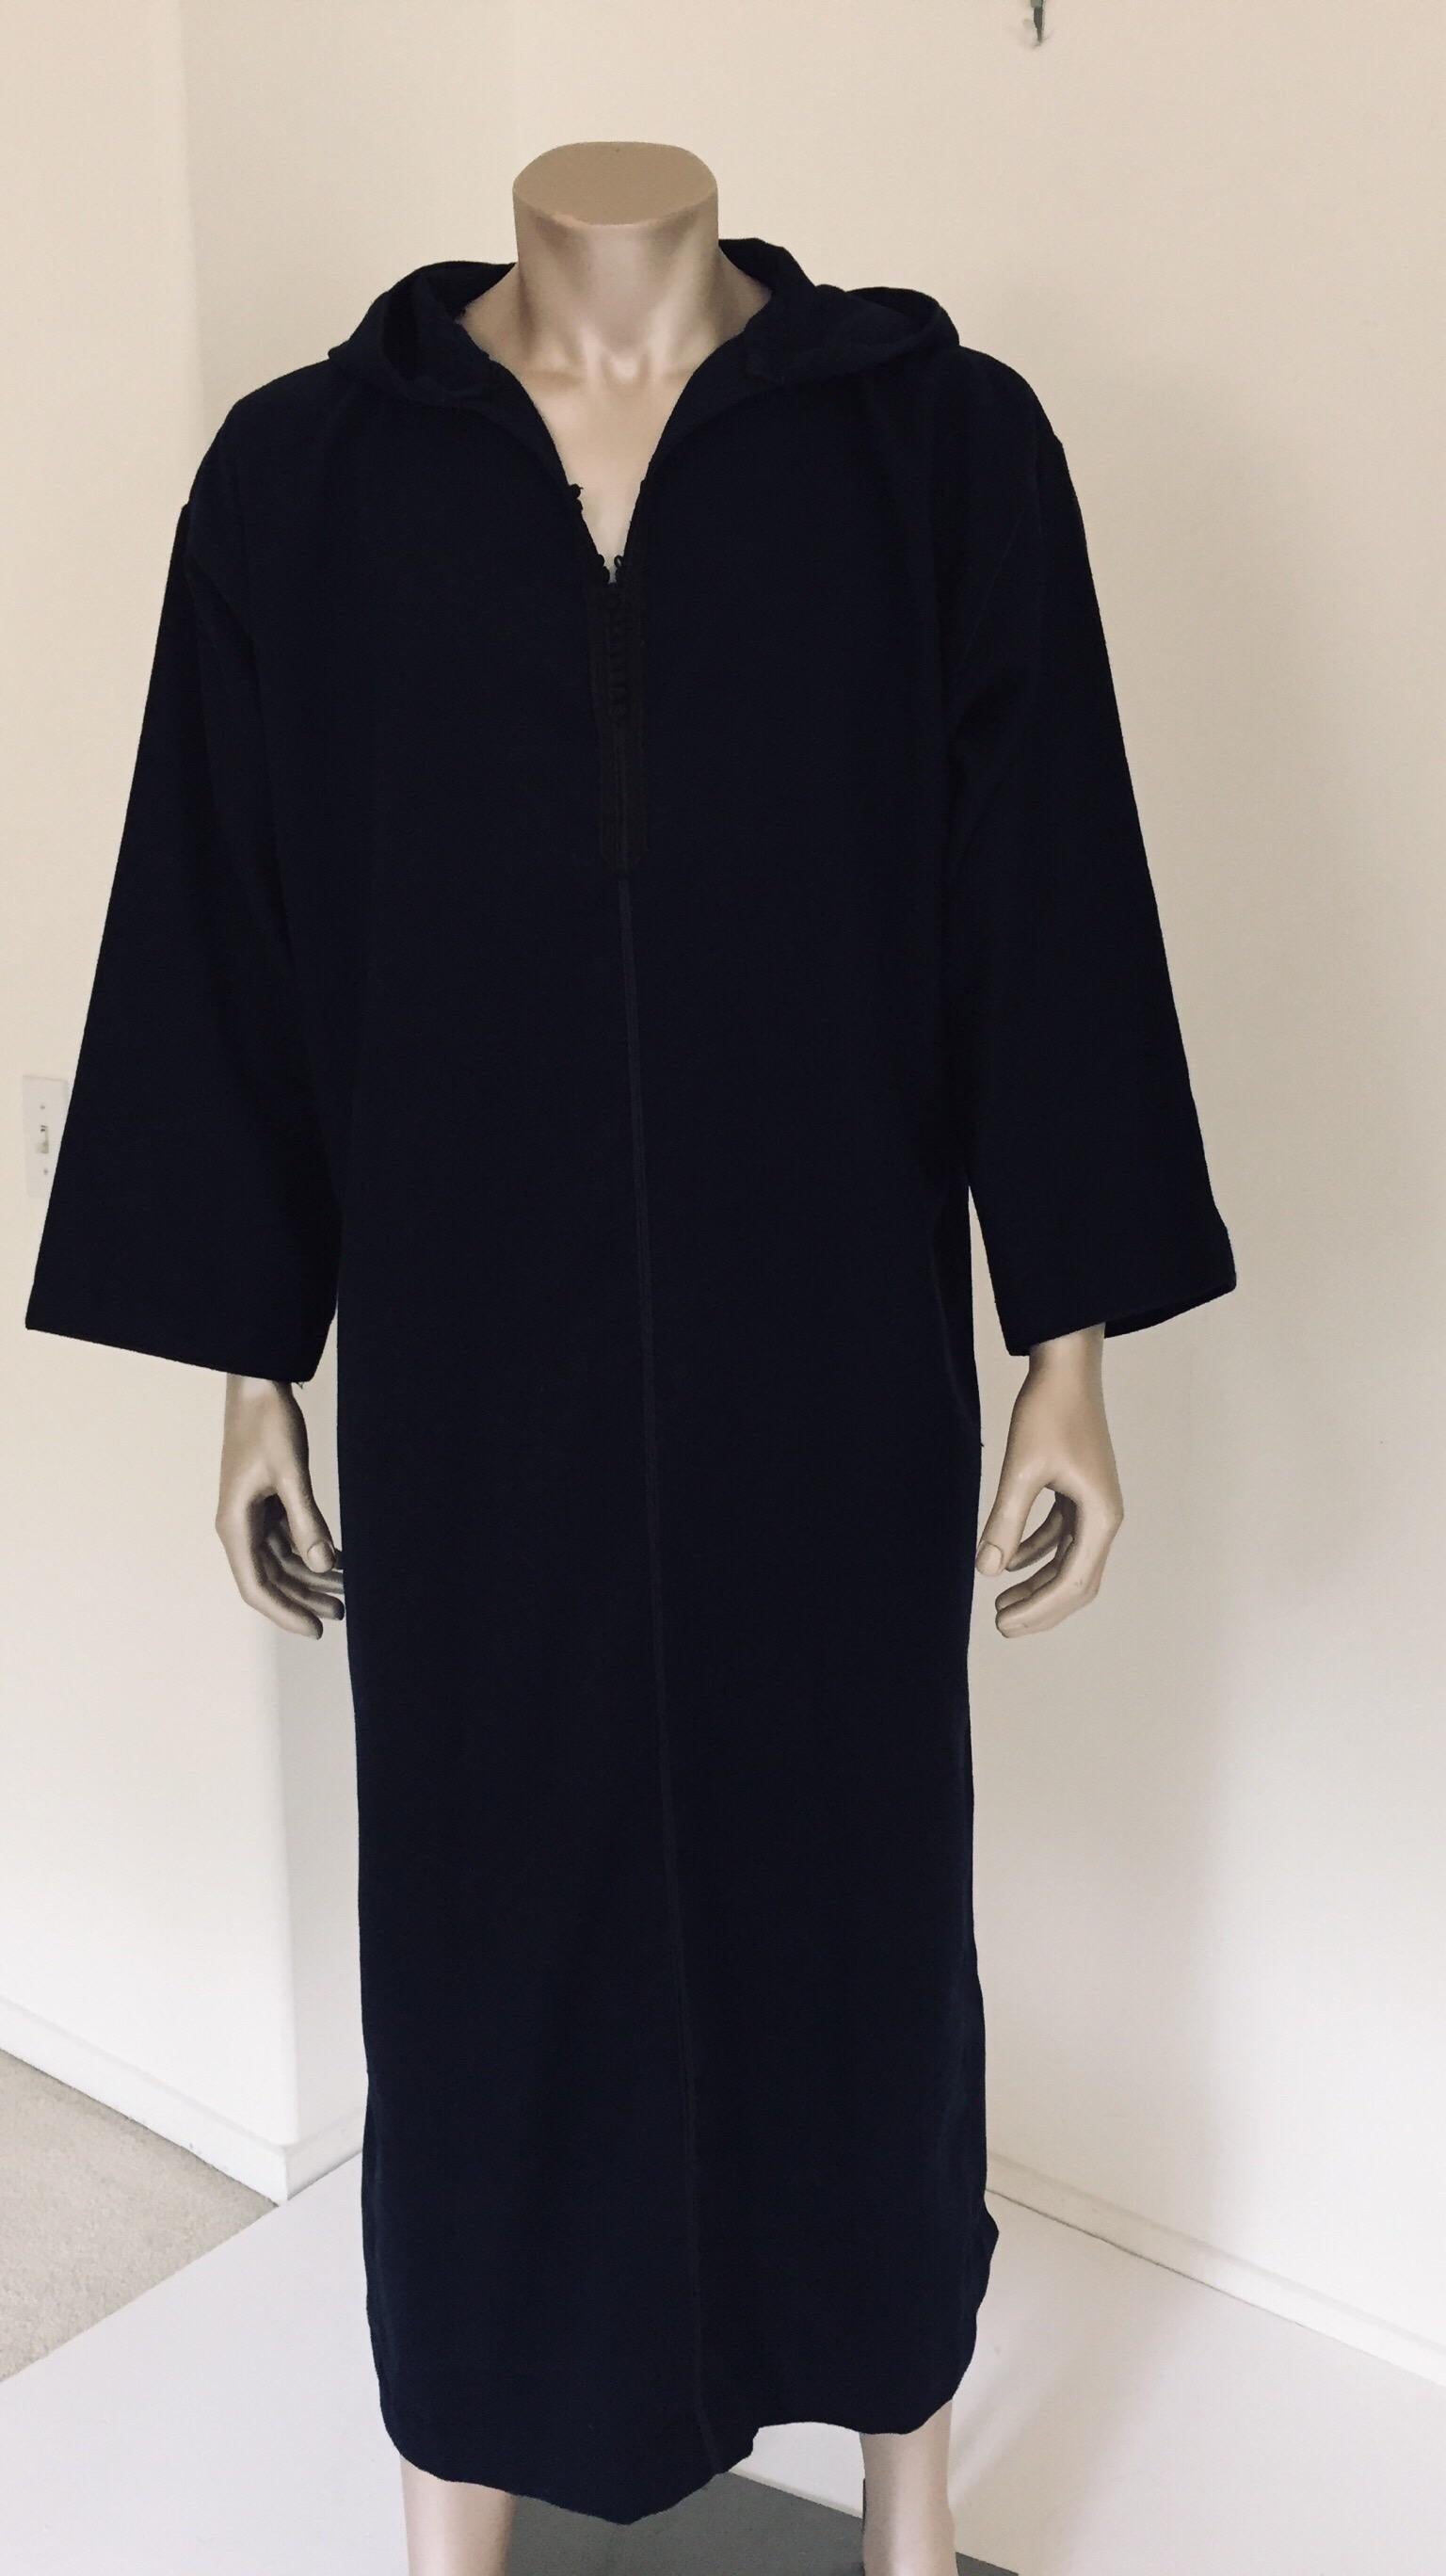 Moroccan Gentleman Hooded Blue Wool Djellaba In Good Condition For Sale In North Hollywood, CA